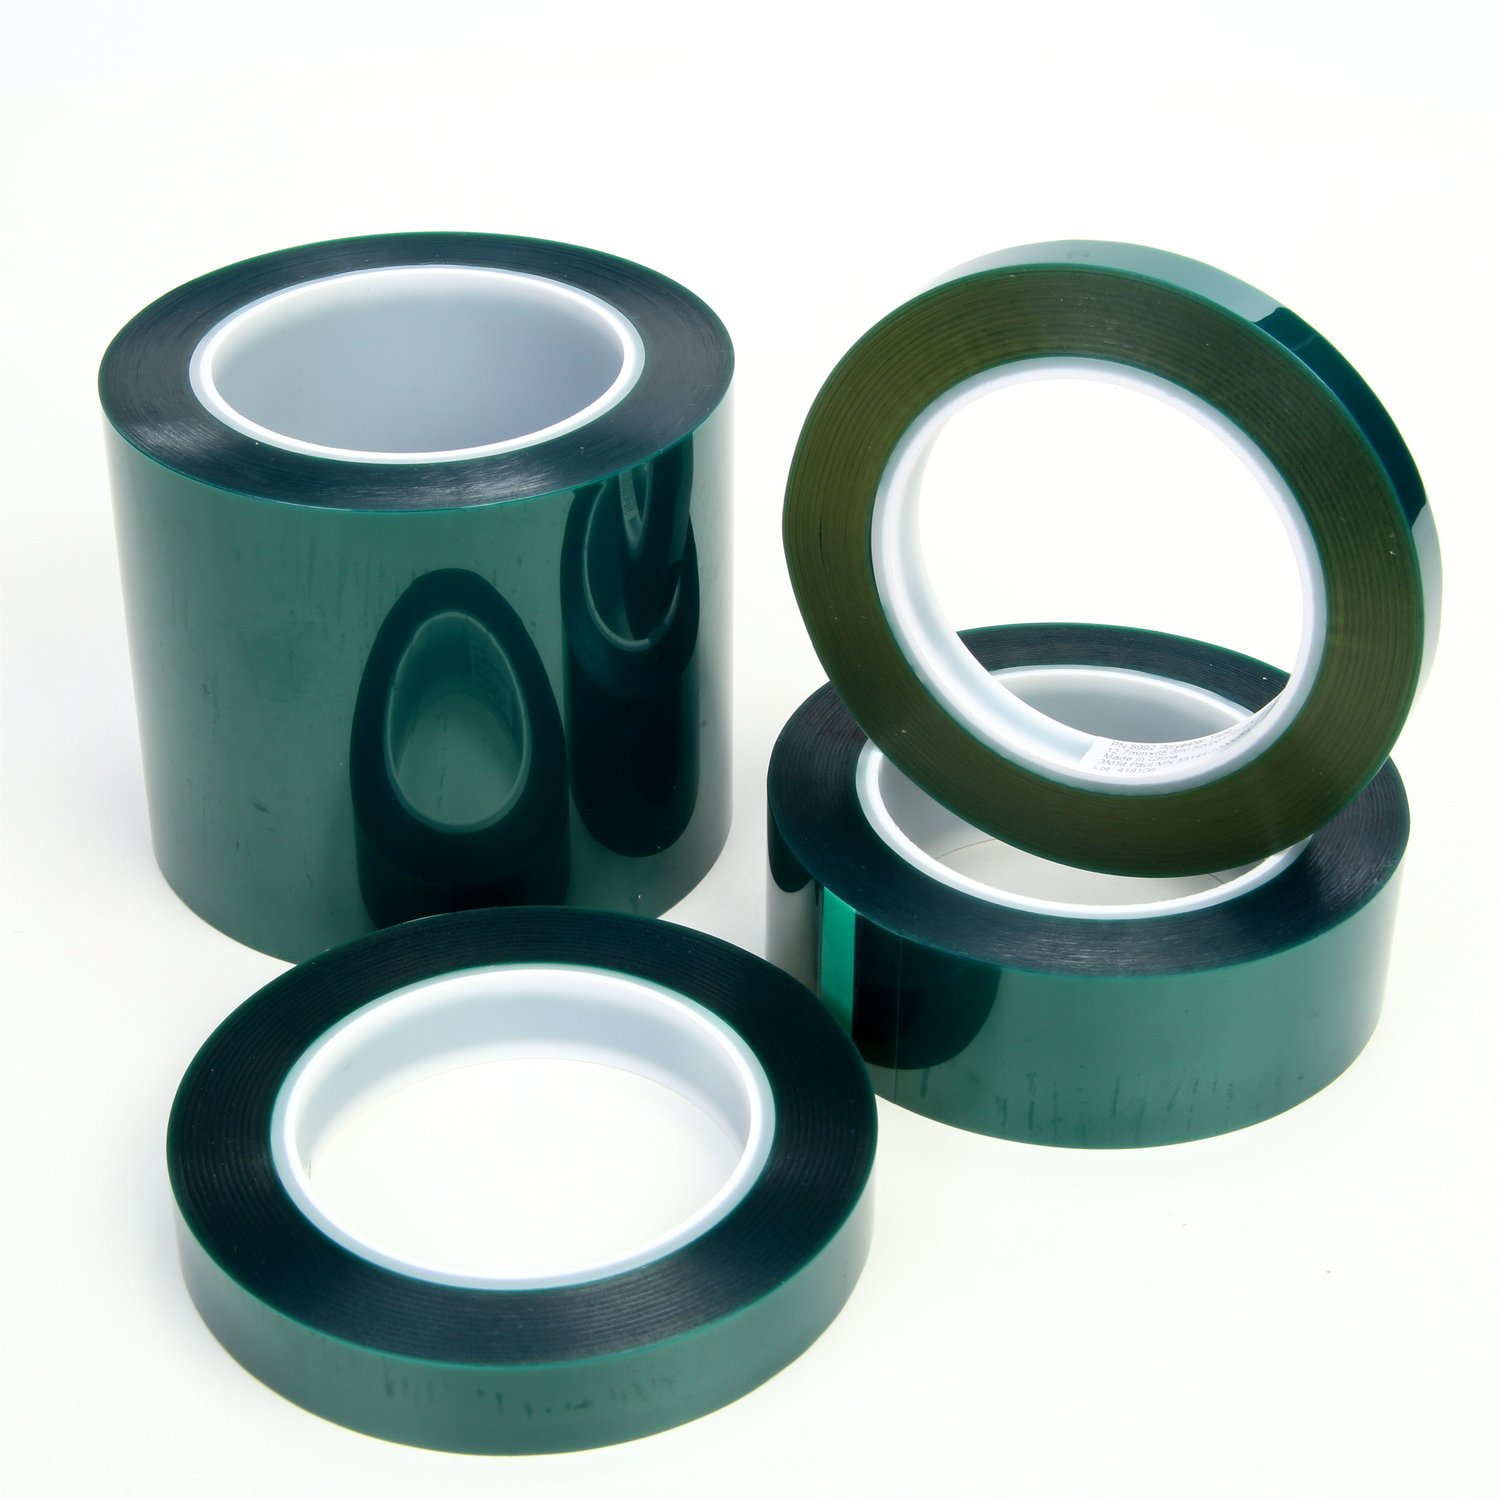 7100170122 - 3M Polyester Tape 8992, Green, 2 1/2 in x 72 yd, 3.2 mil, 12 rolls per
case